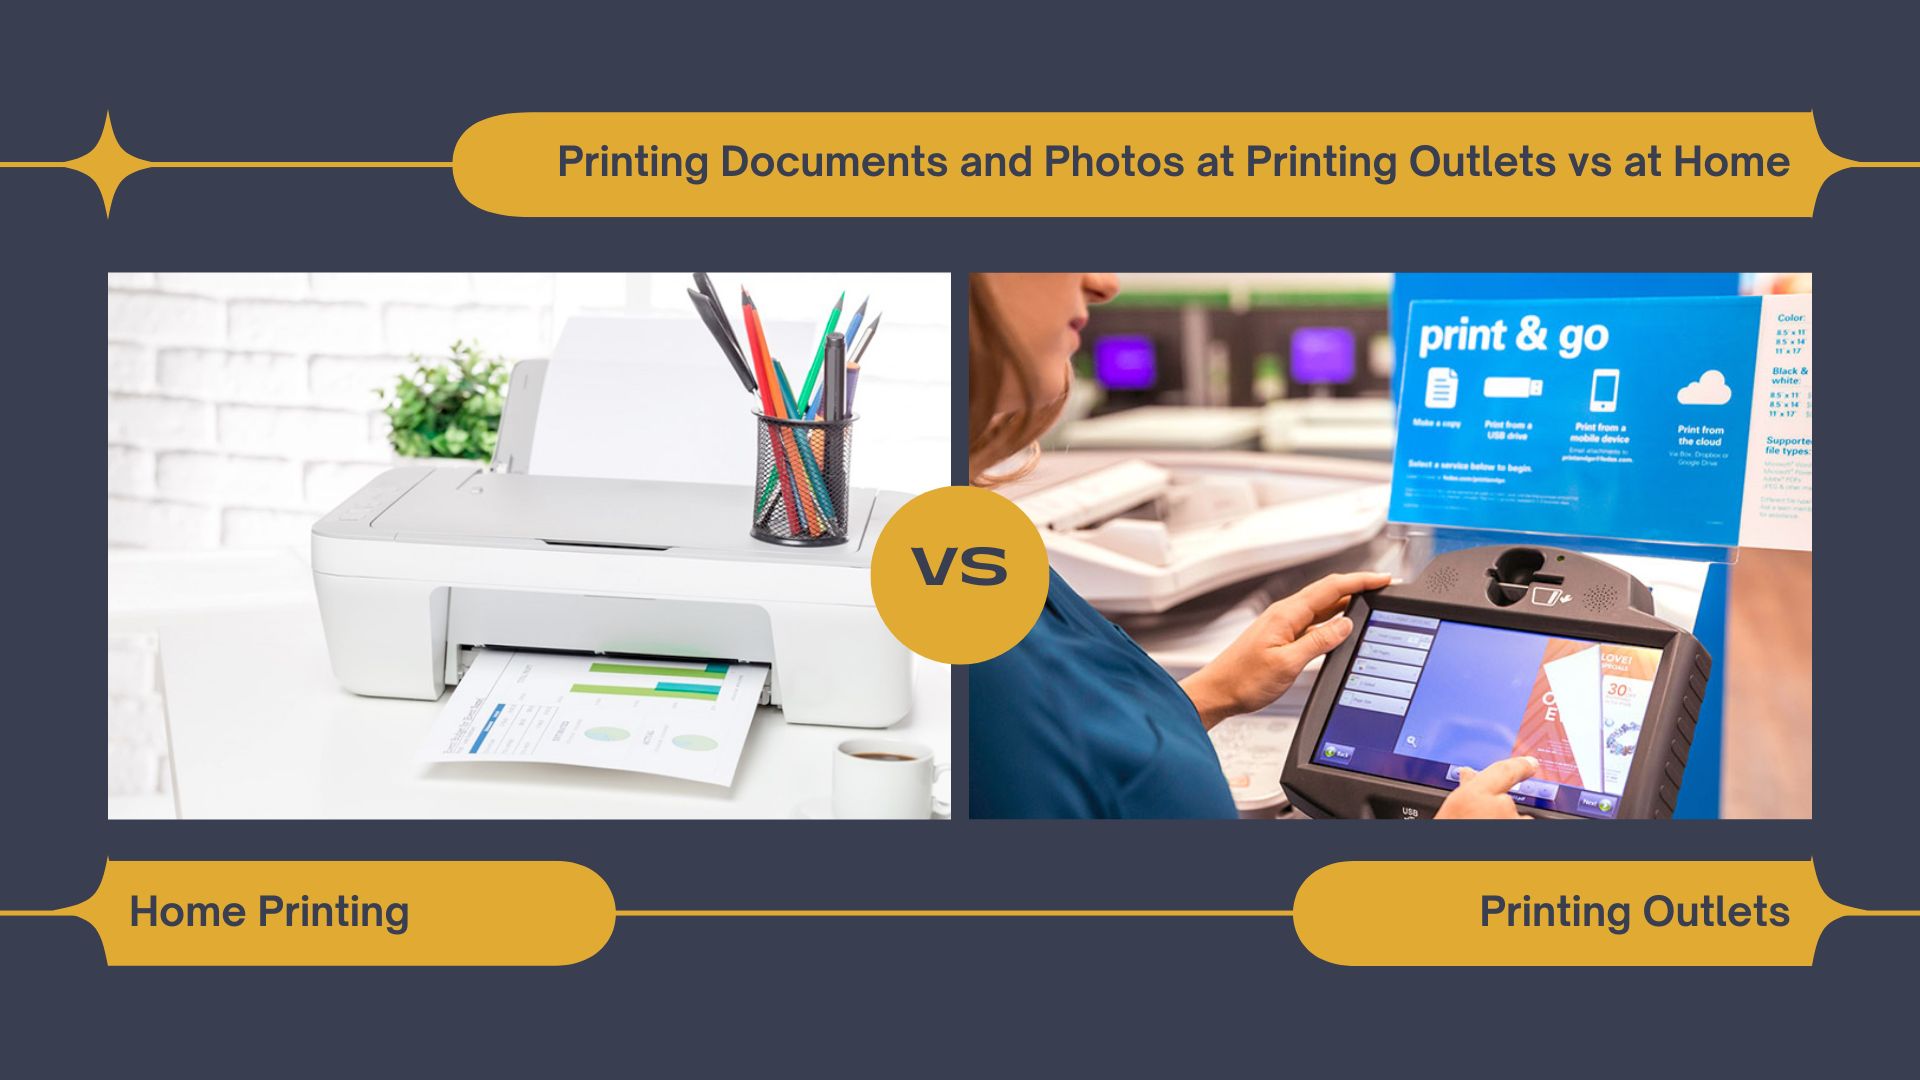 Printing Documents and Photos at Printing Outlets vs at Home